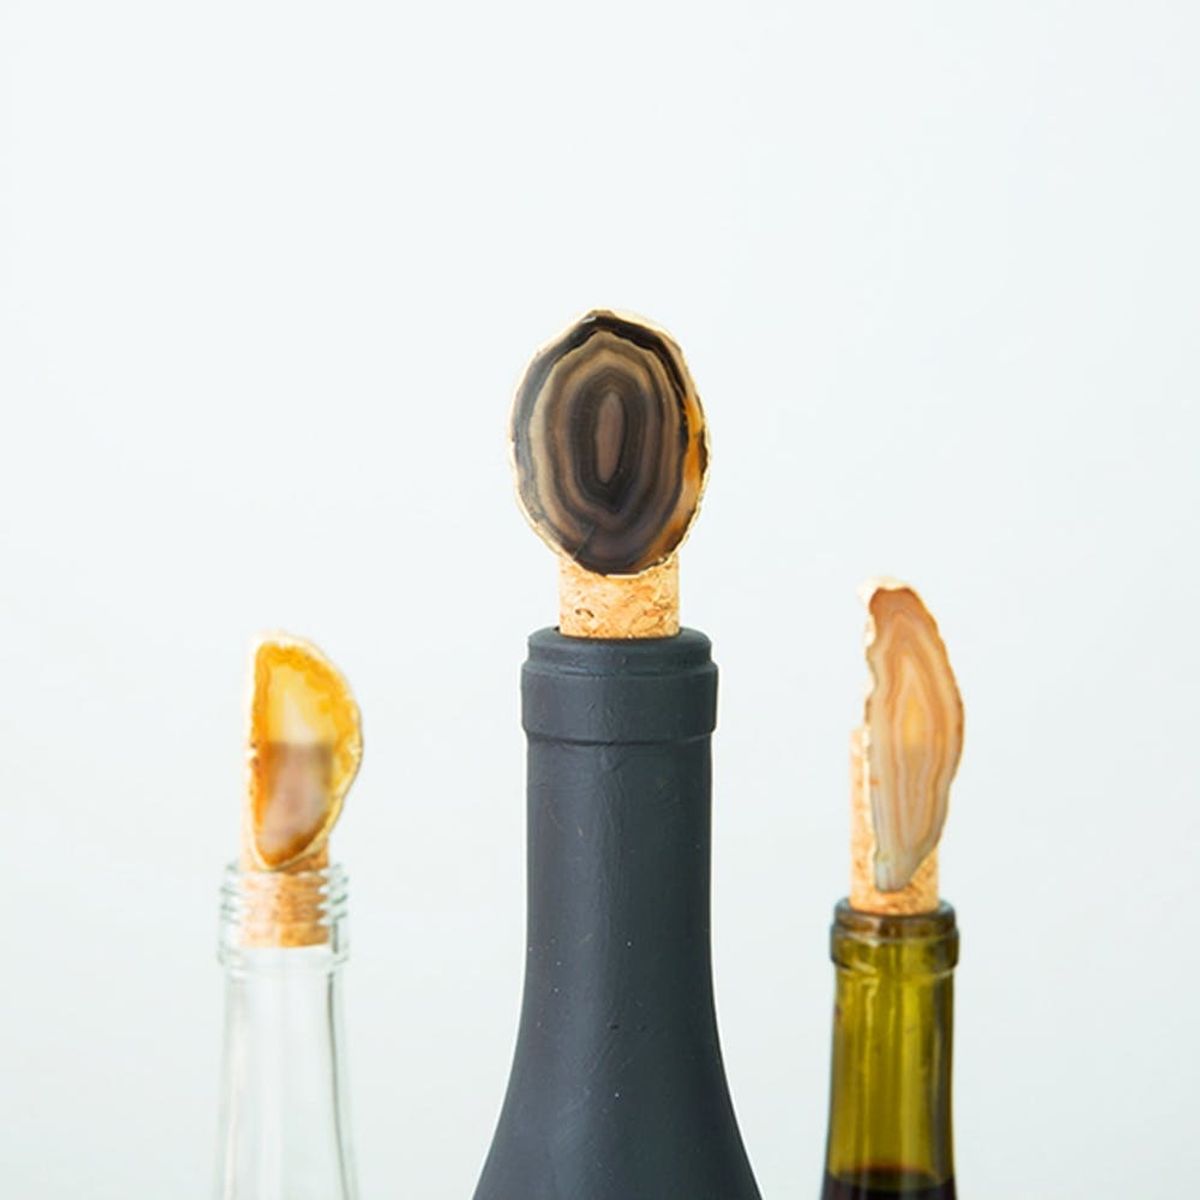 How to Make Gold-Leaf Agate Bottle Stoppers in Under 5 Minutes